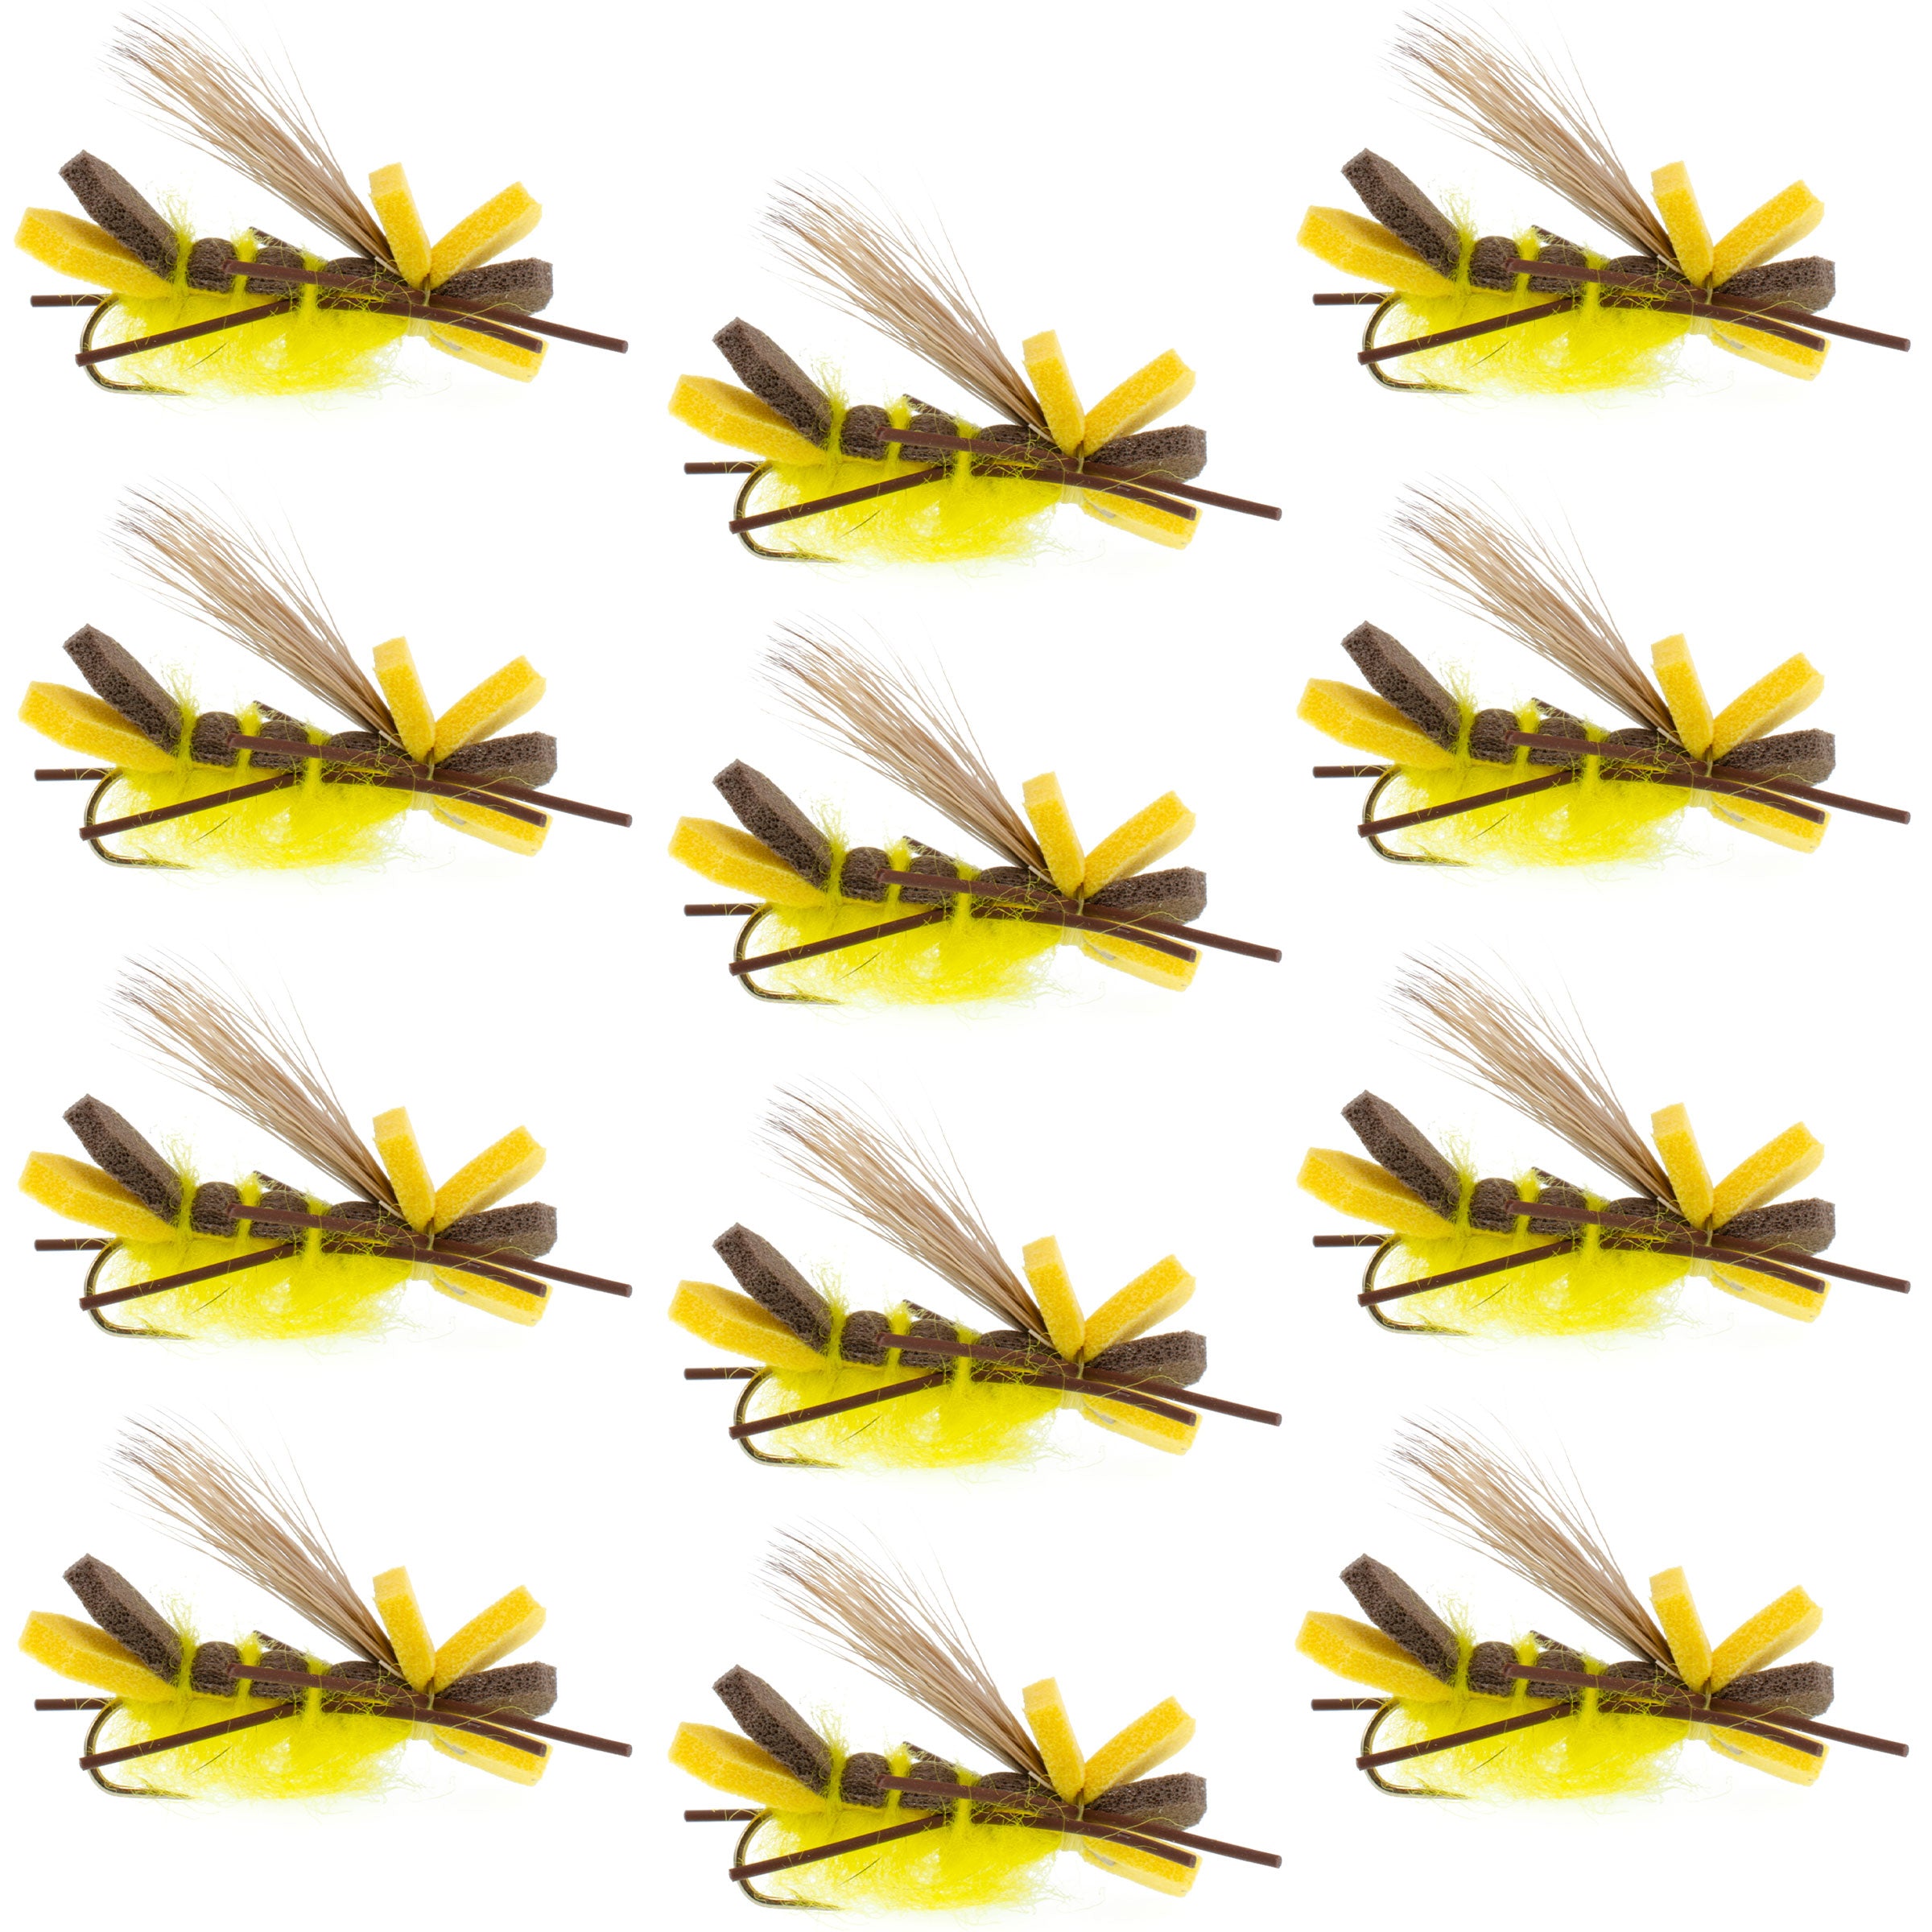  The Fly Fishing Place Basics Collection - Foam Hoppers Dry Fly  Assortment - 10 Dry Fishing Grasshopper Flies - 5 Patterns - Hook Size 10 :  Sports & Outdoors